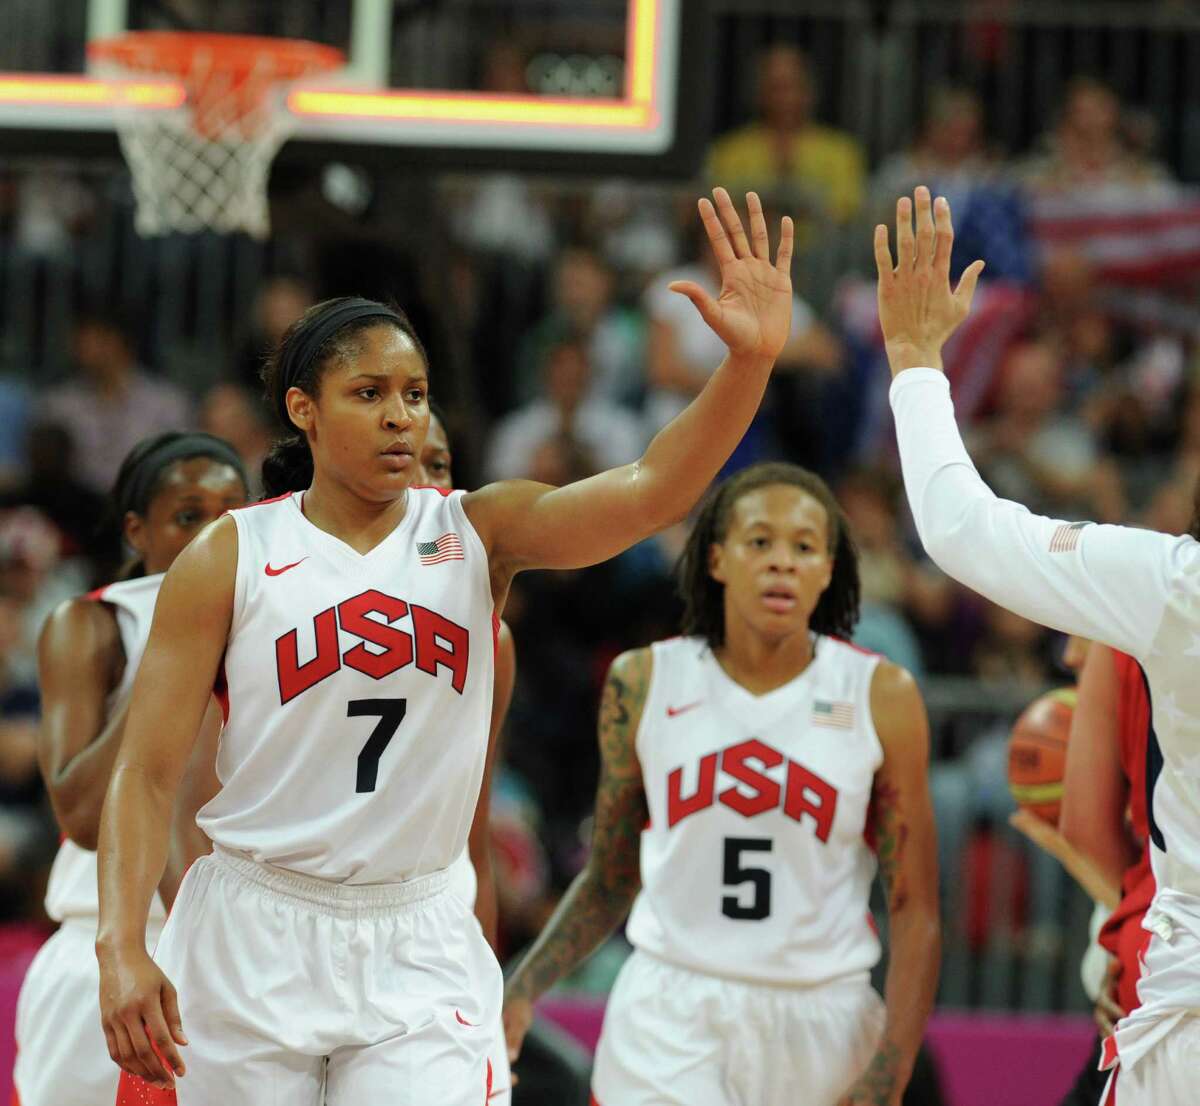 US guard Maya Moore celebrates with team mates after winning the women's quarter final basketball match USA vs Canada at the London 2012 Olympic Games on August 7, 2012 at the North Greenwich arena in London. AFP PHOTO / MARK RALSTONMARK RALSTON/AFP/GettyImages